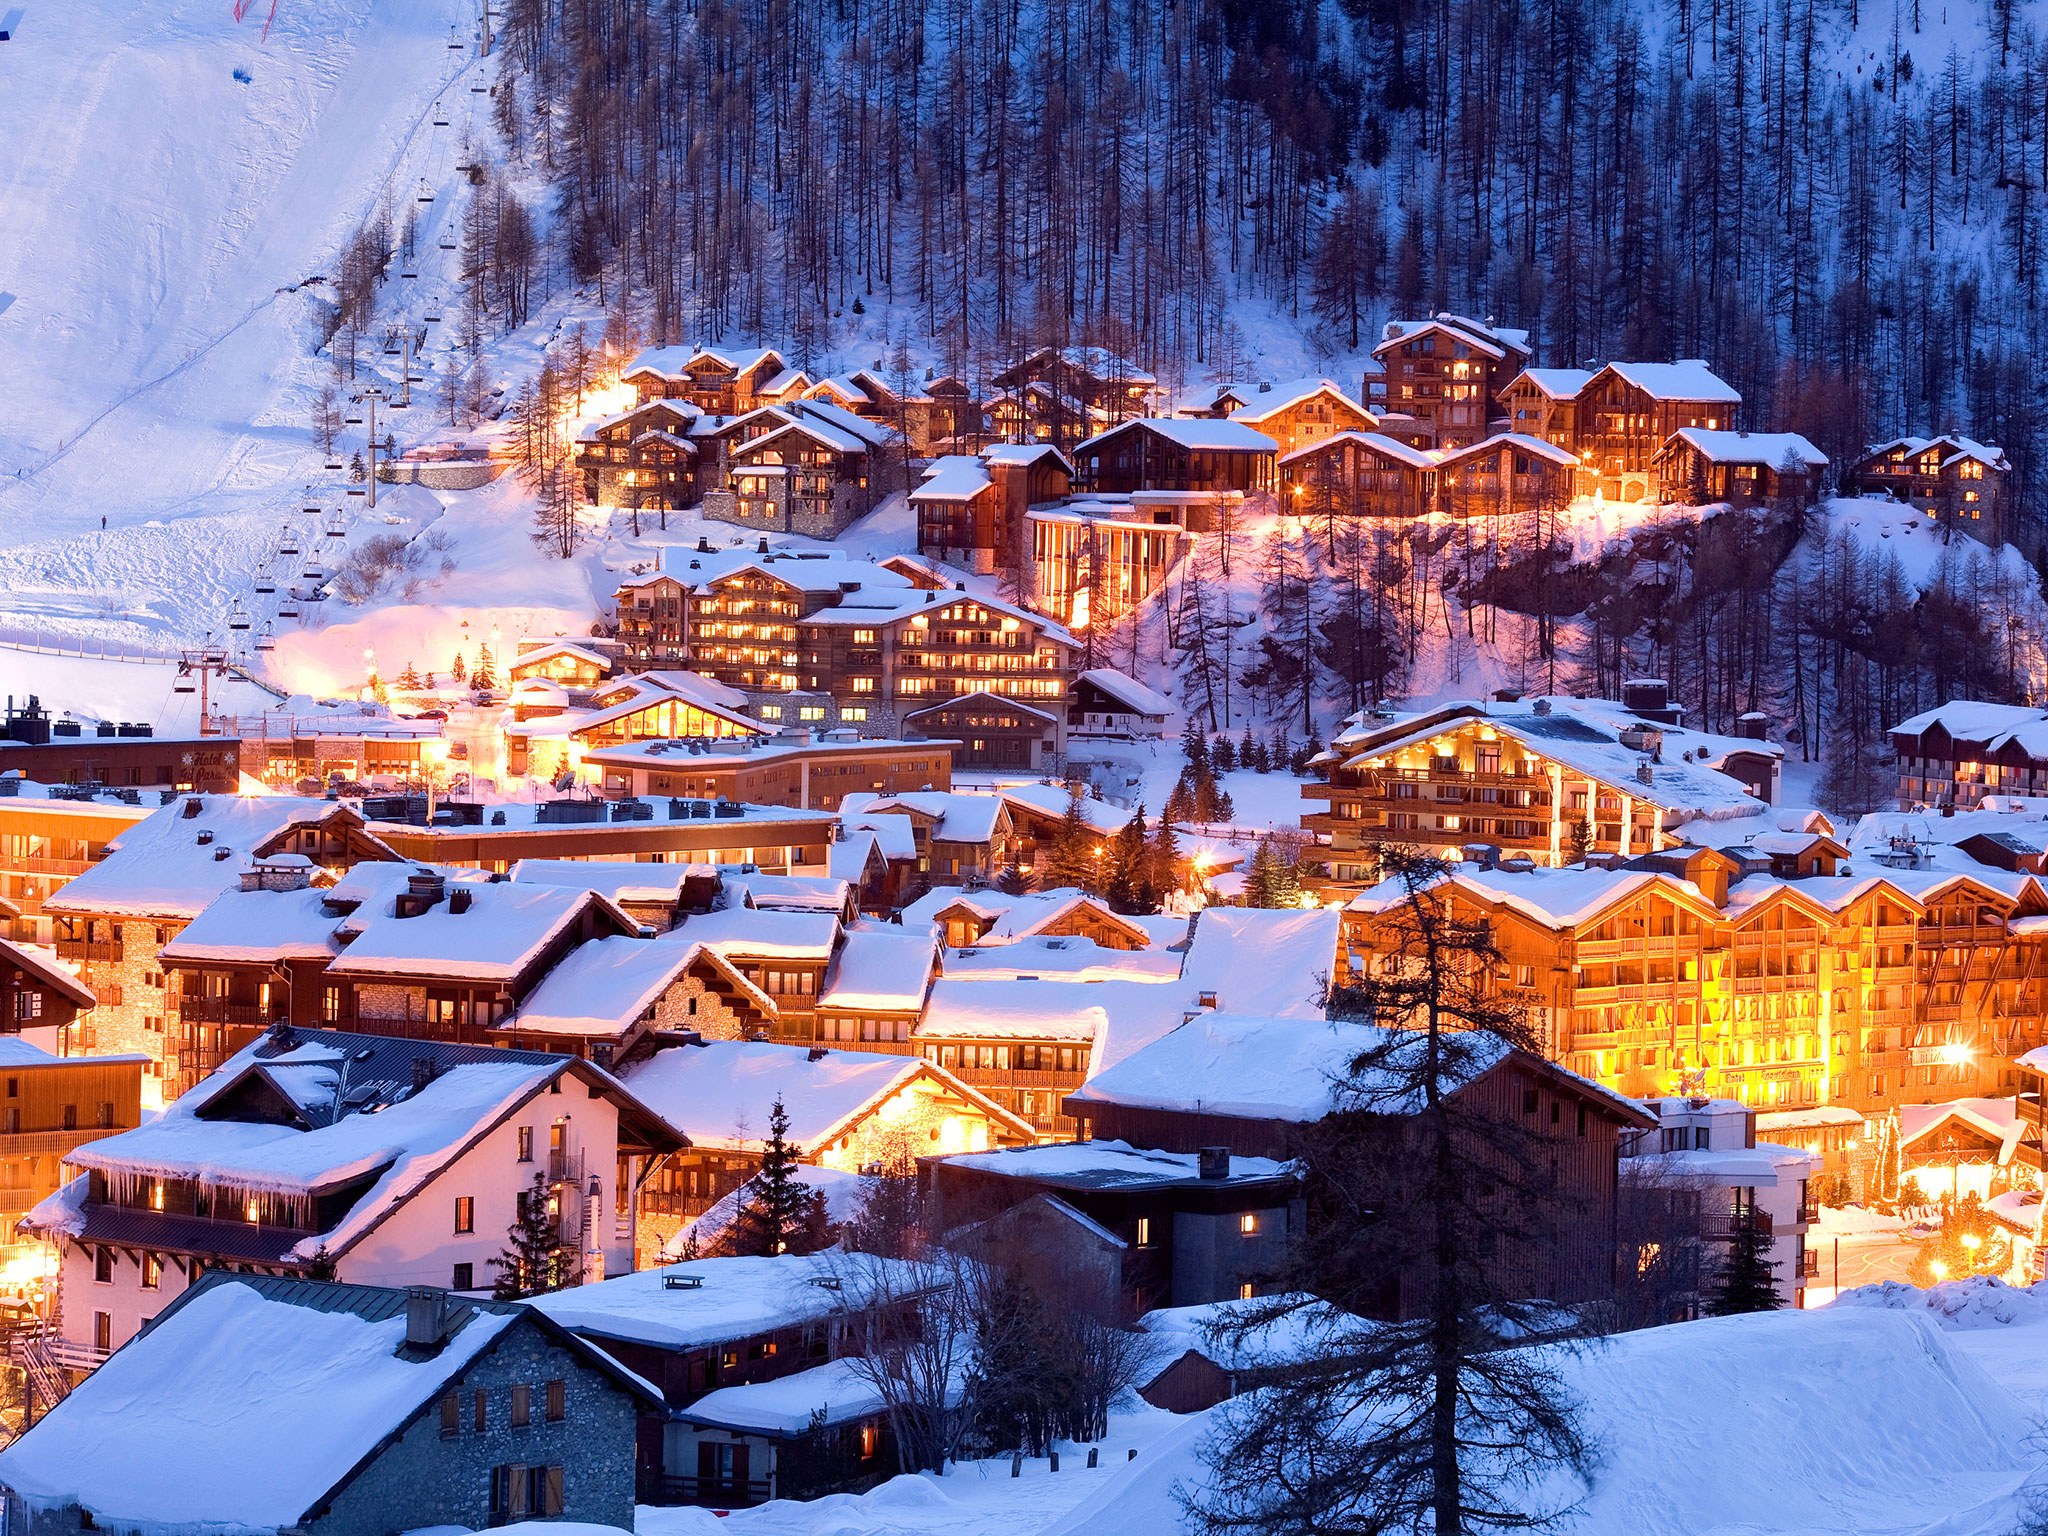 Benefits of Catered Ski Chalets